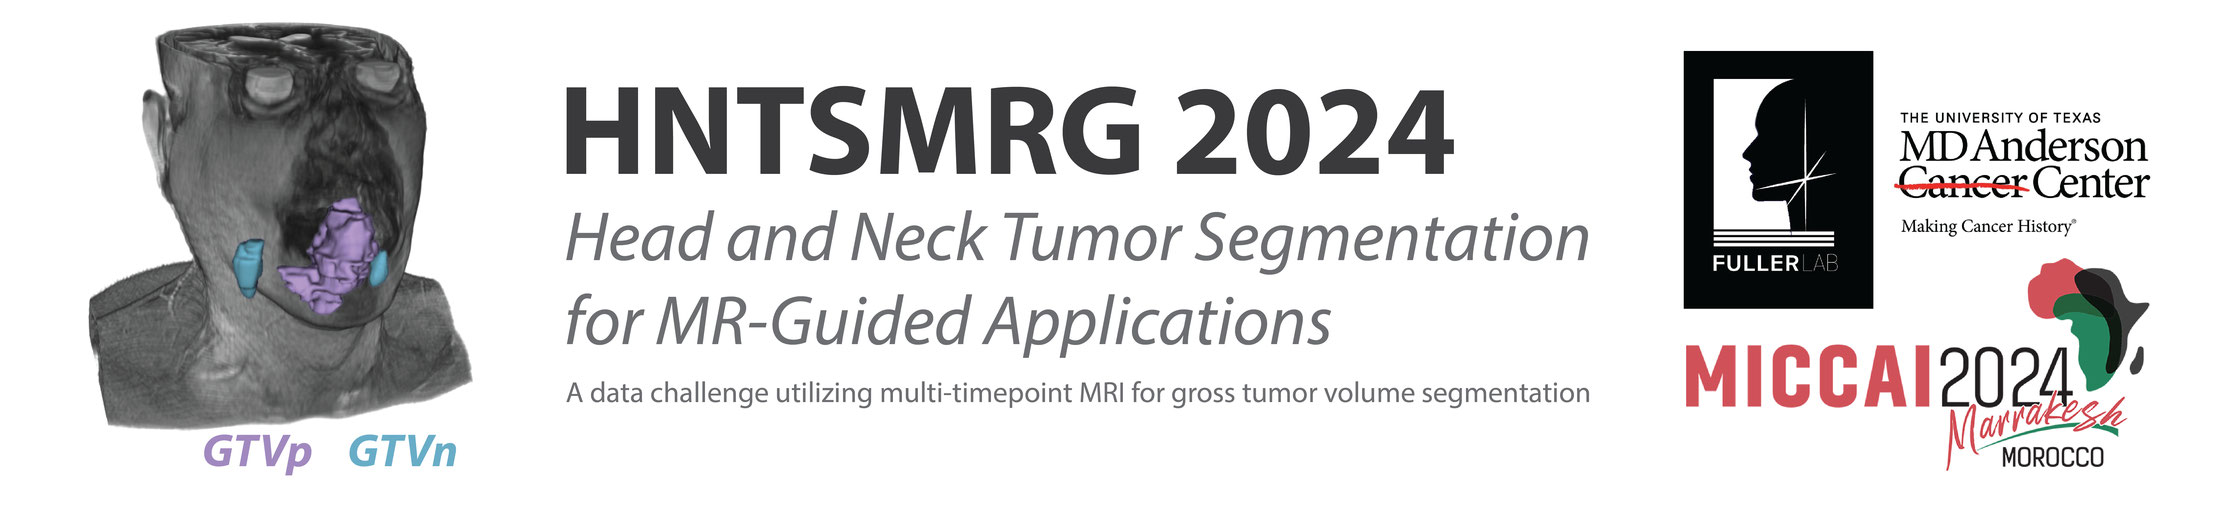 Head and Neck Tumor Segmentation for MR-Guided Applications Banner